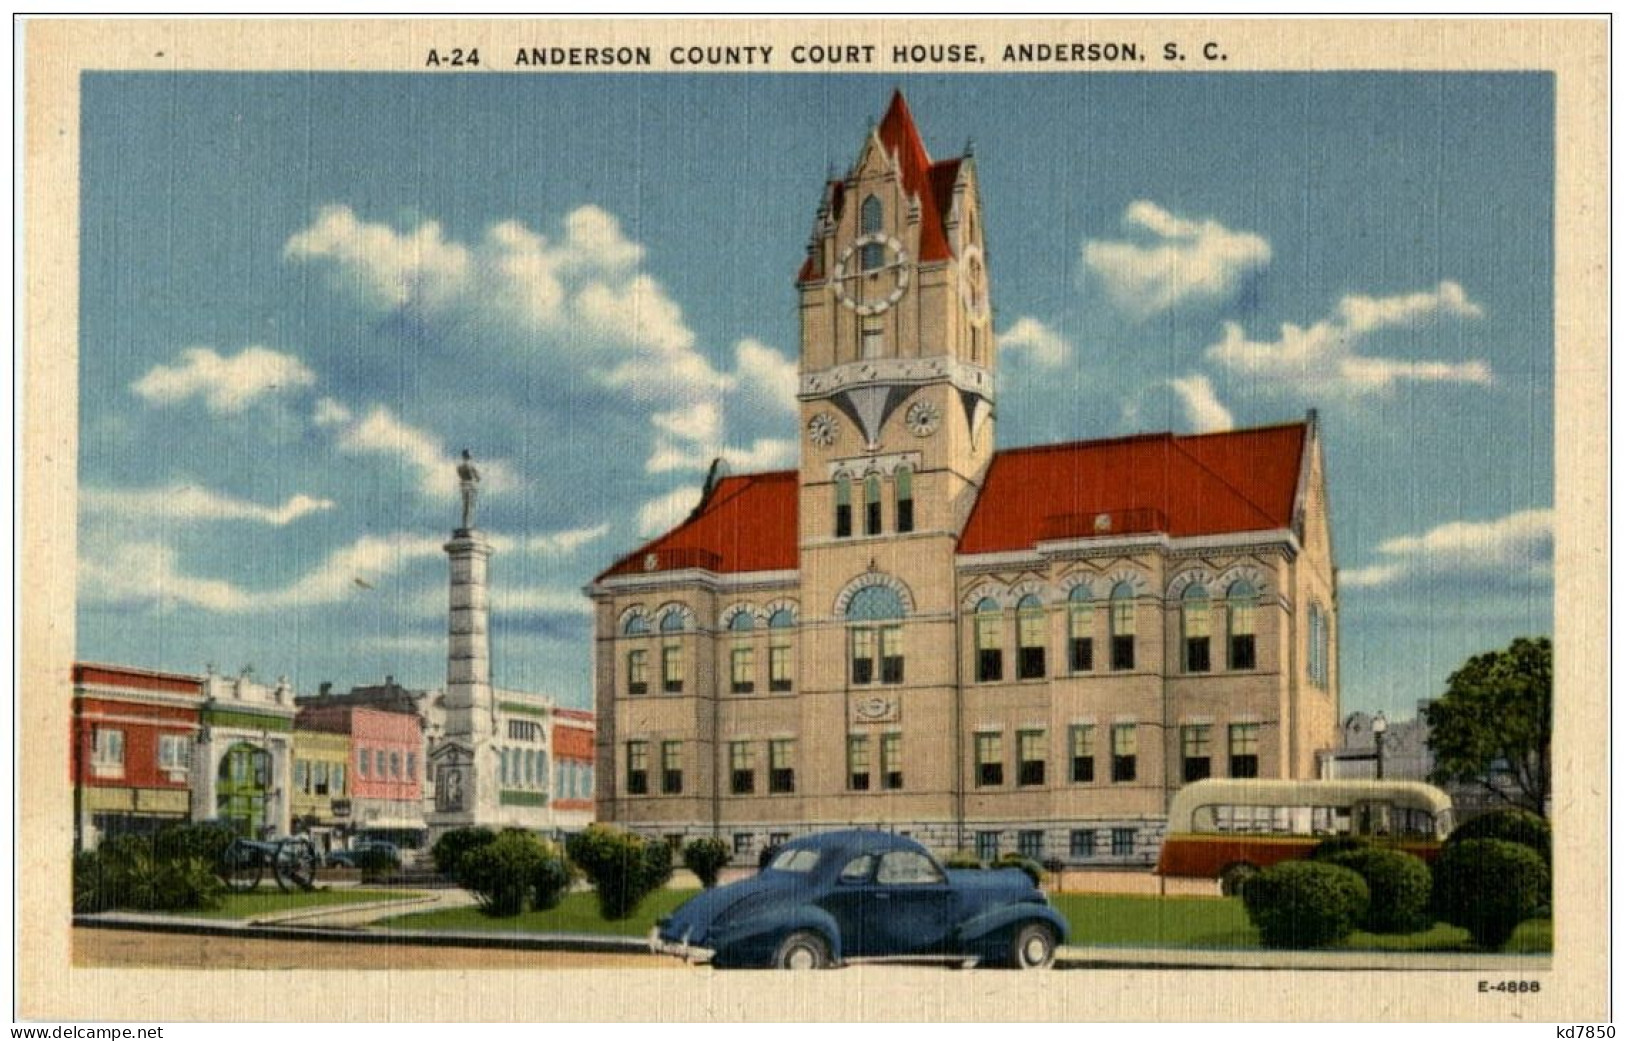 Anderson County Court House - Anderson